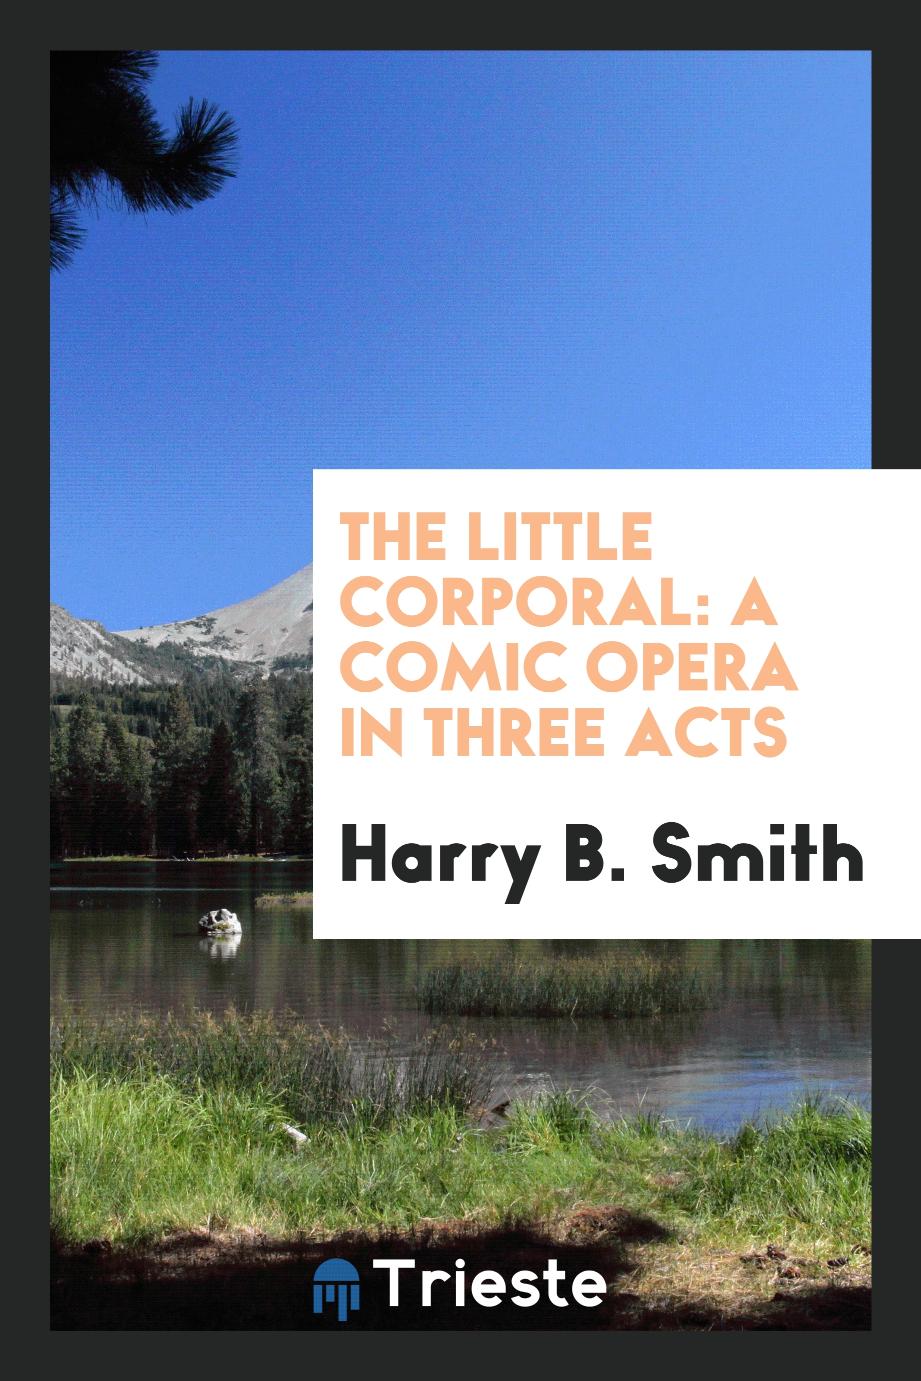 The little corporal: a comic opera in three acts